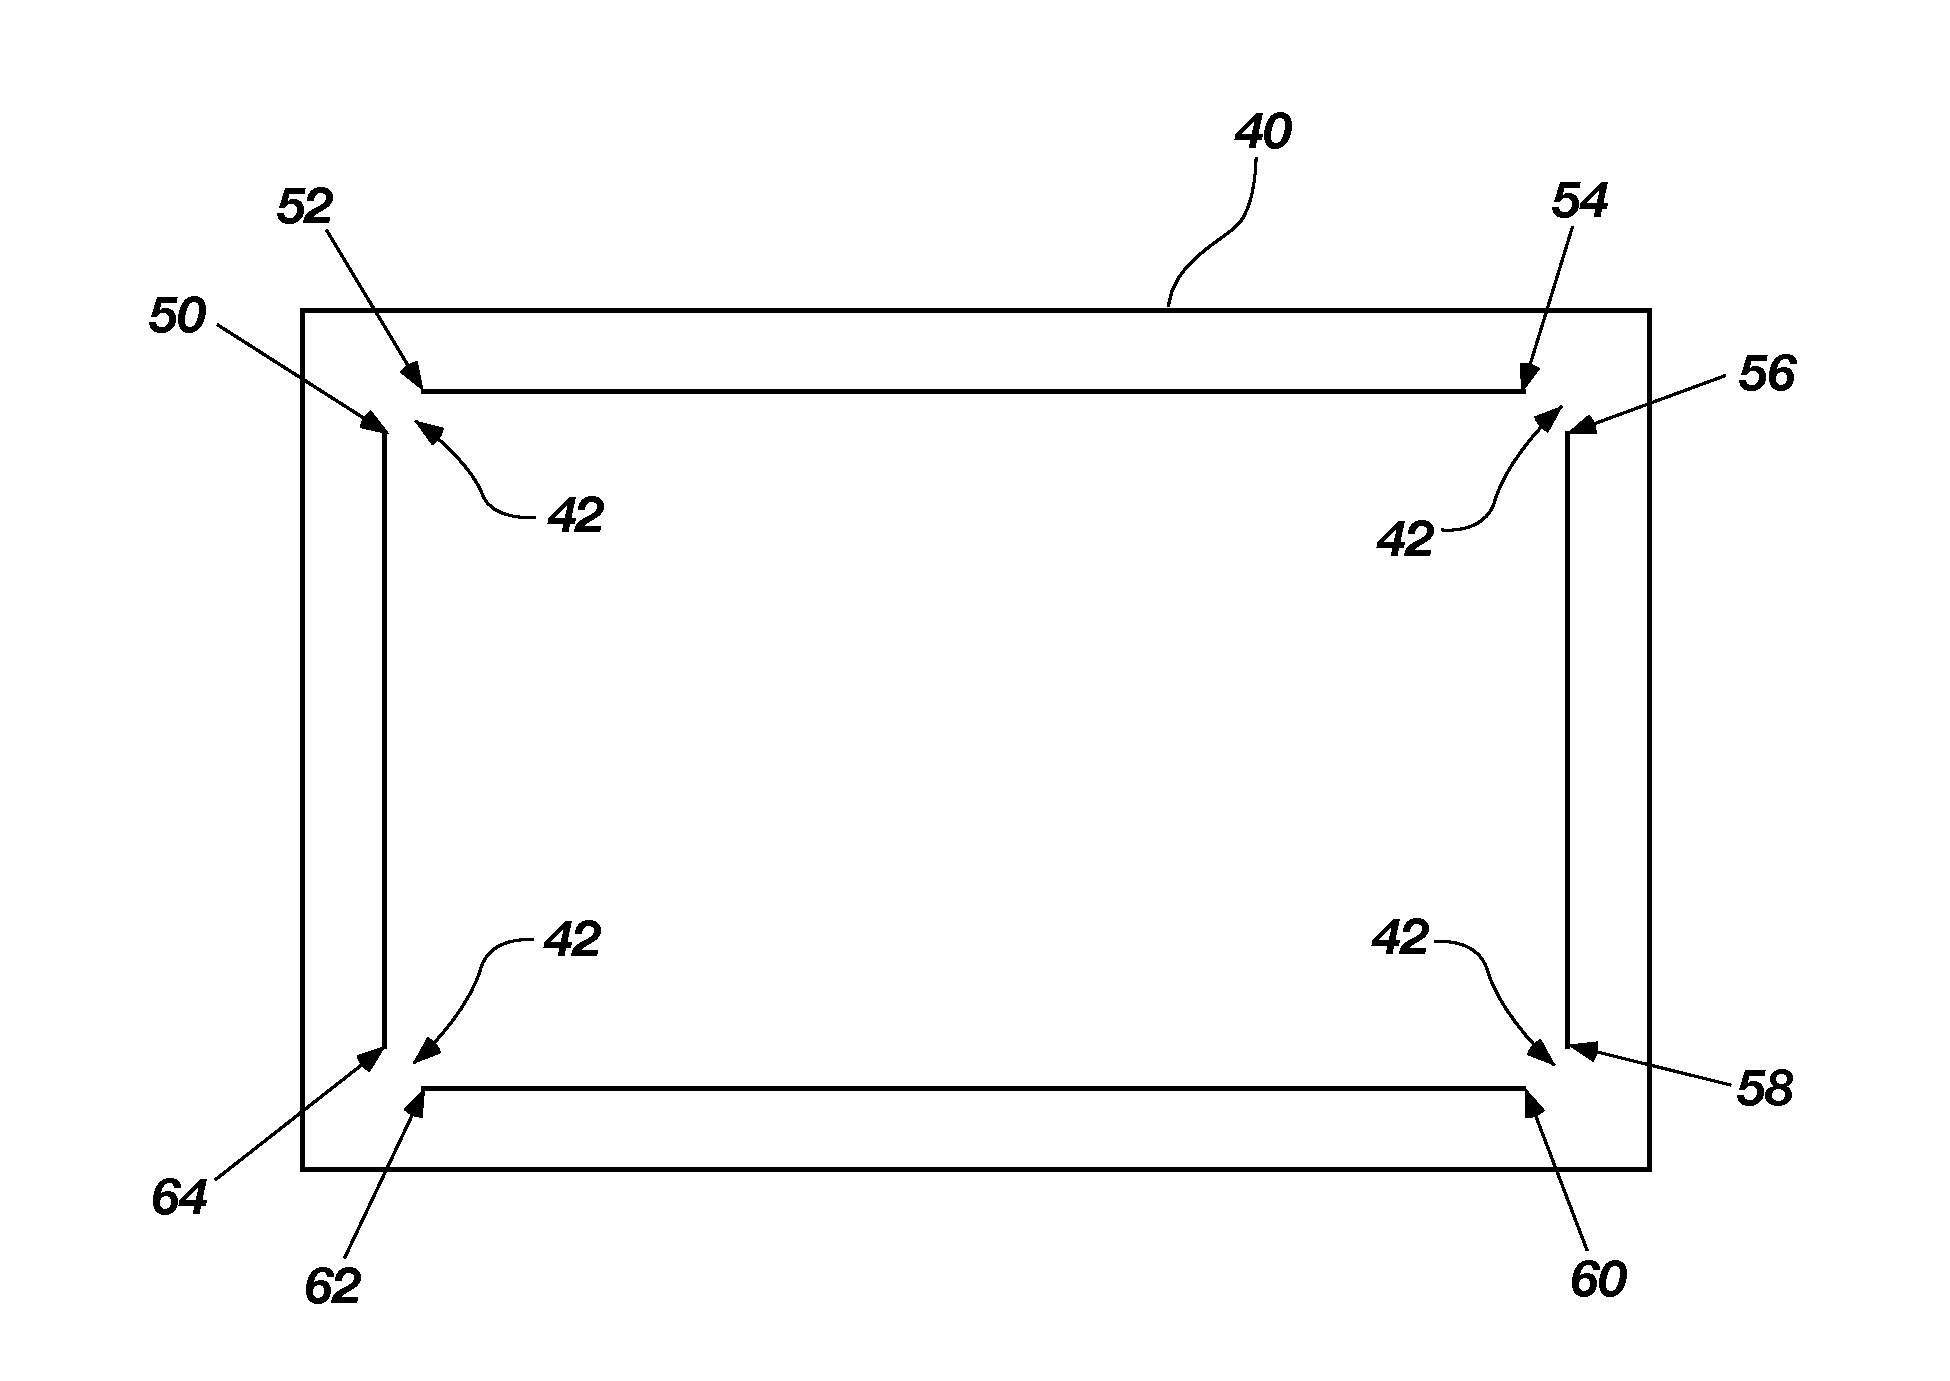 Surface capacitance with area gestures